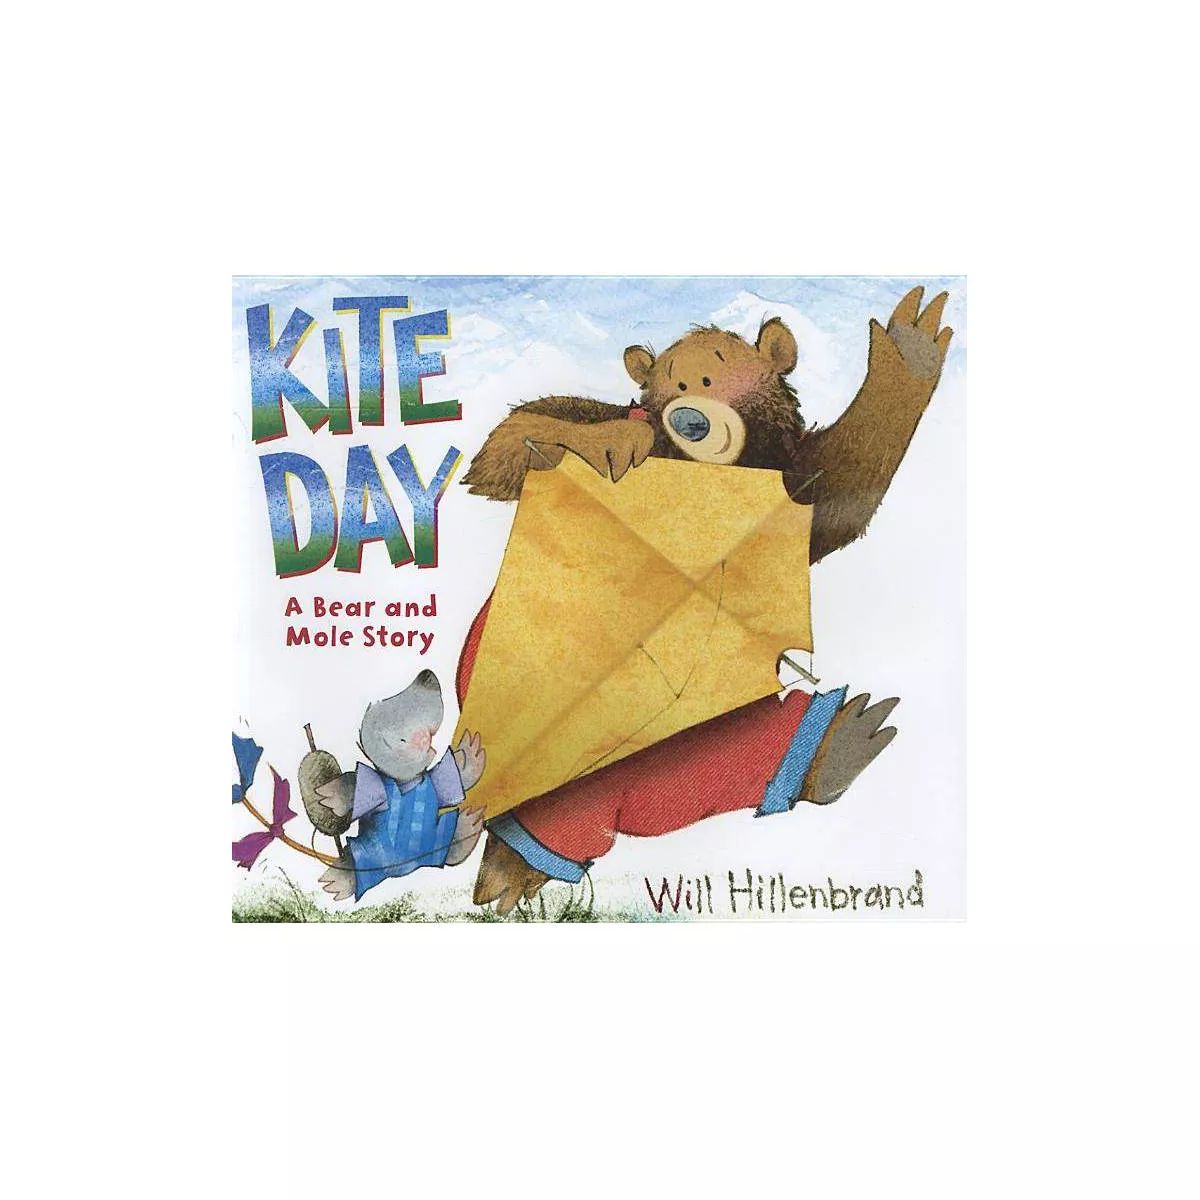 Kite Day - (Bear and Mole) by Will Hillenbrand | Target